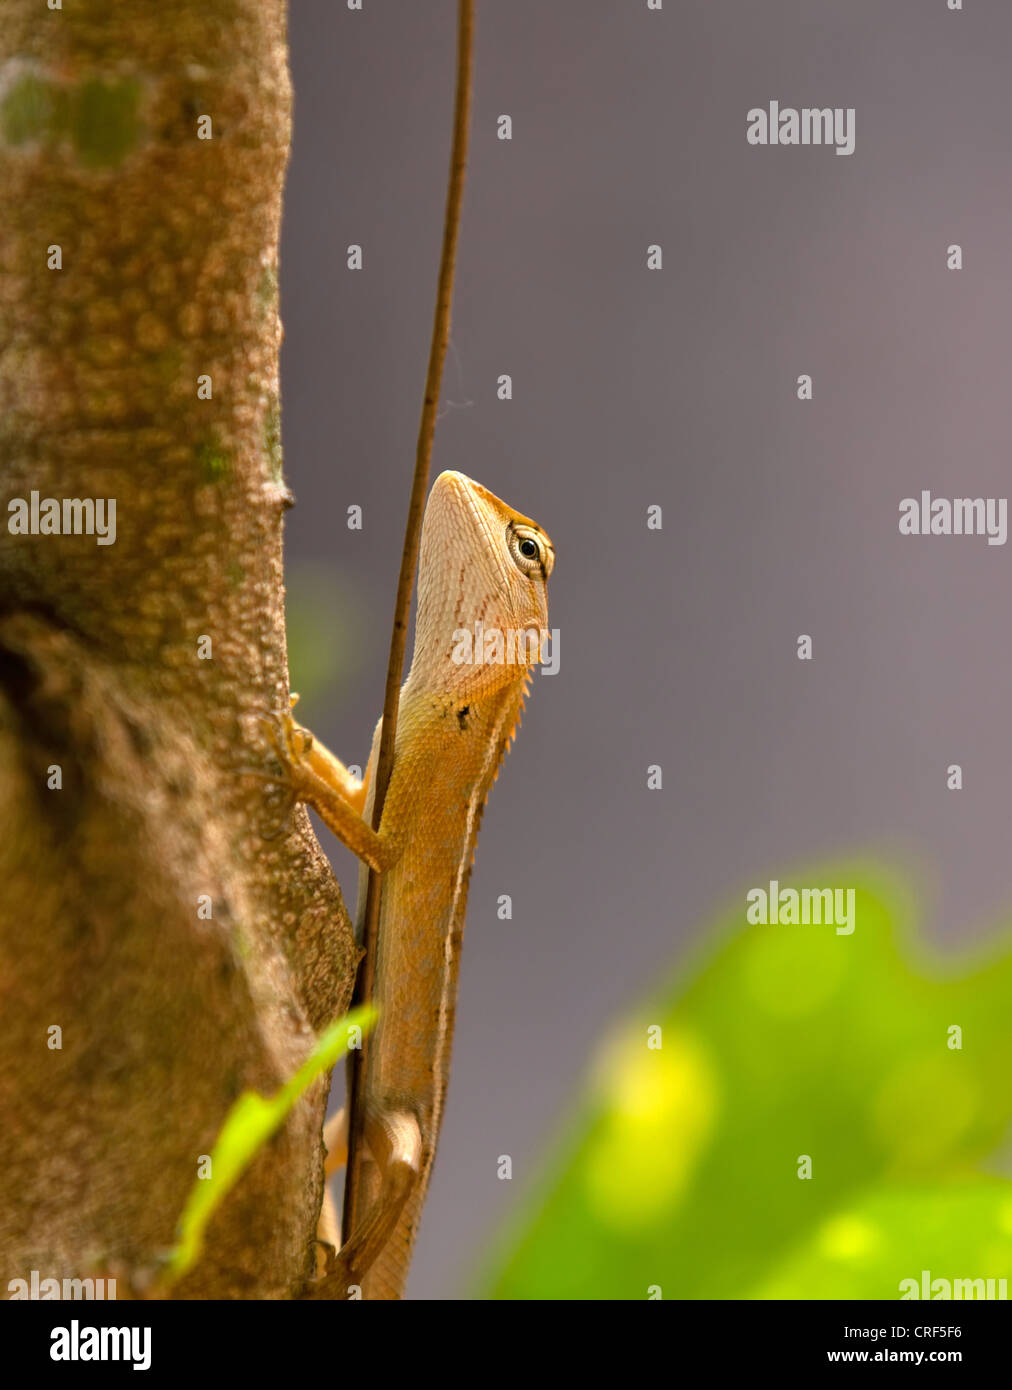 Lizard sitting on the tree branch in tropical forest Stock Photo